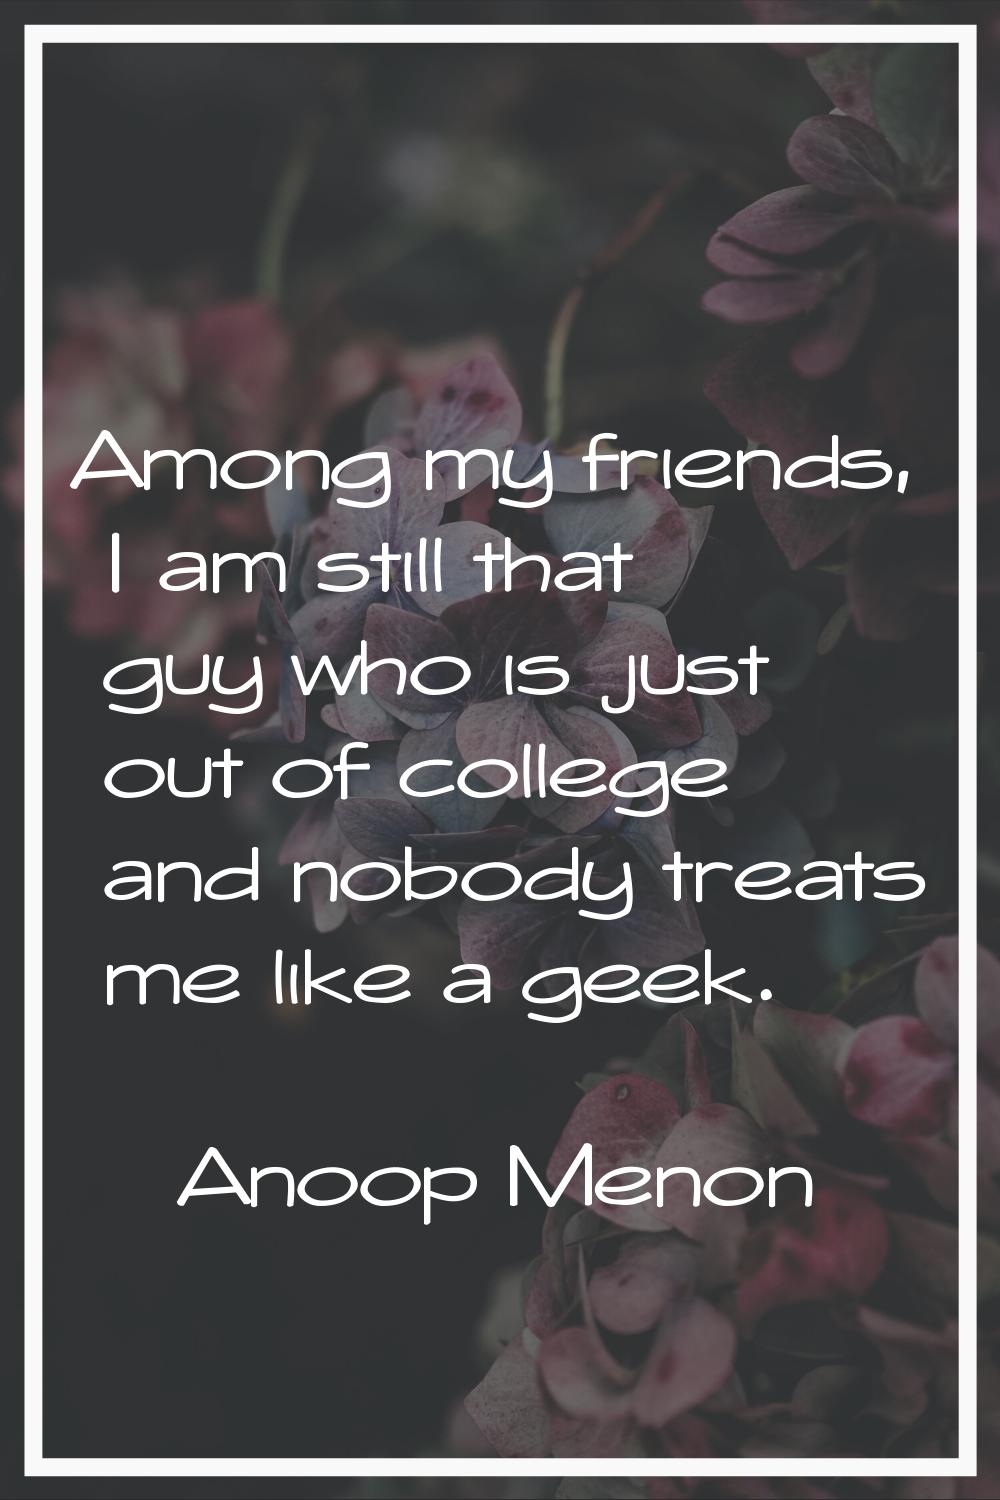 Among my friends, I am still that guy who is just out of college and nobody treats me like a geek.